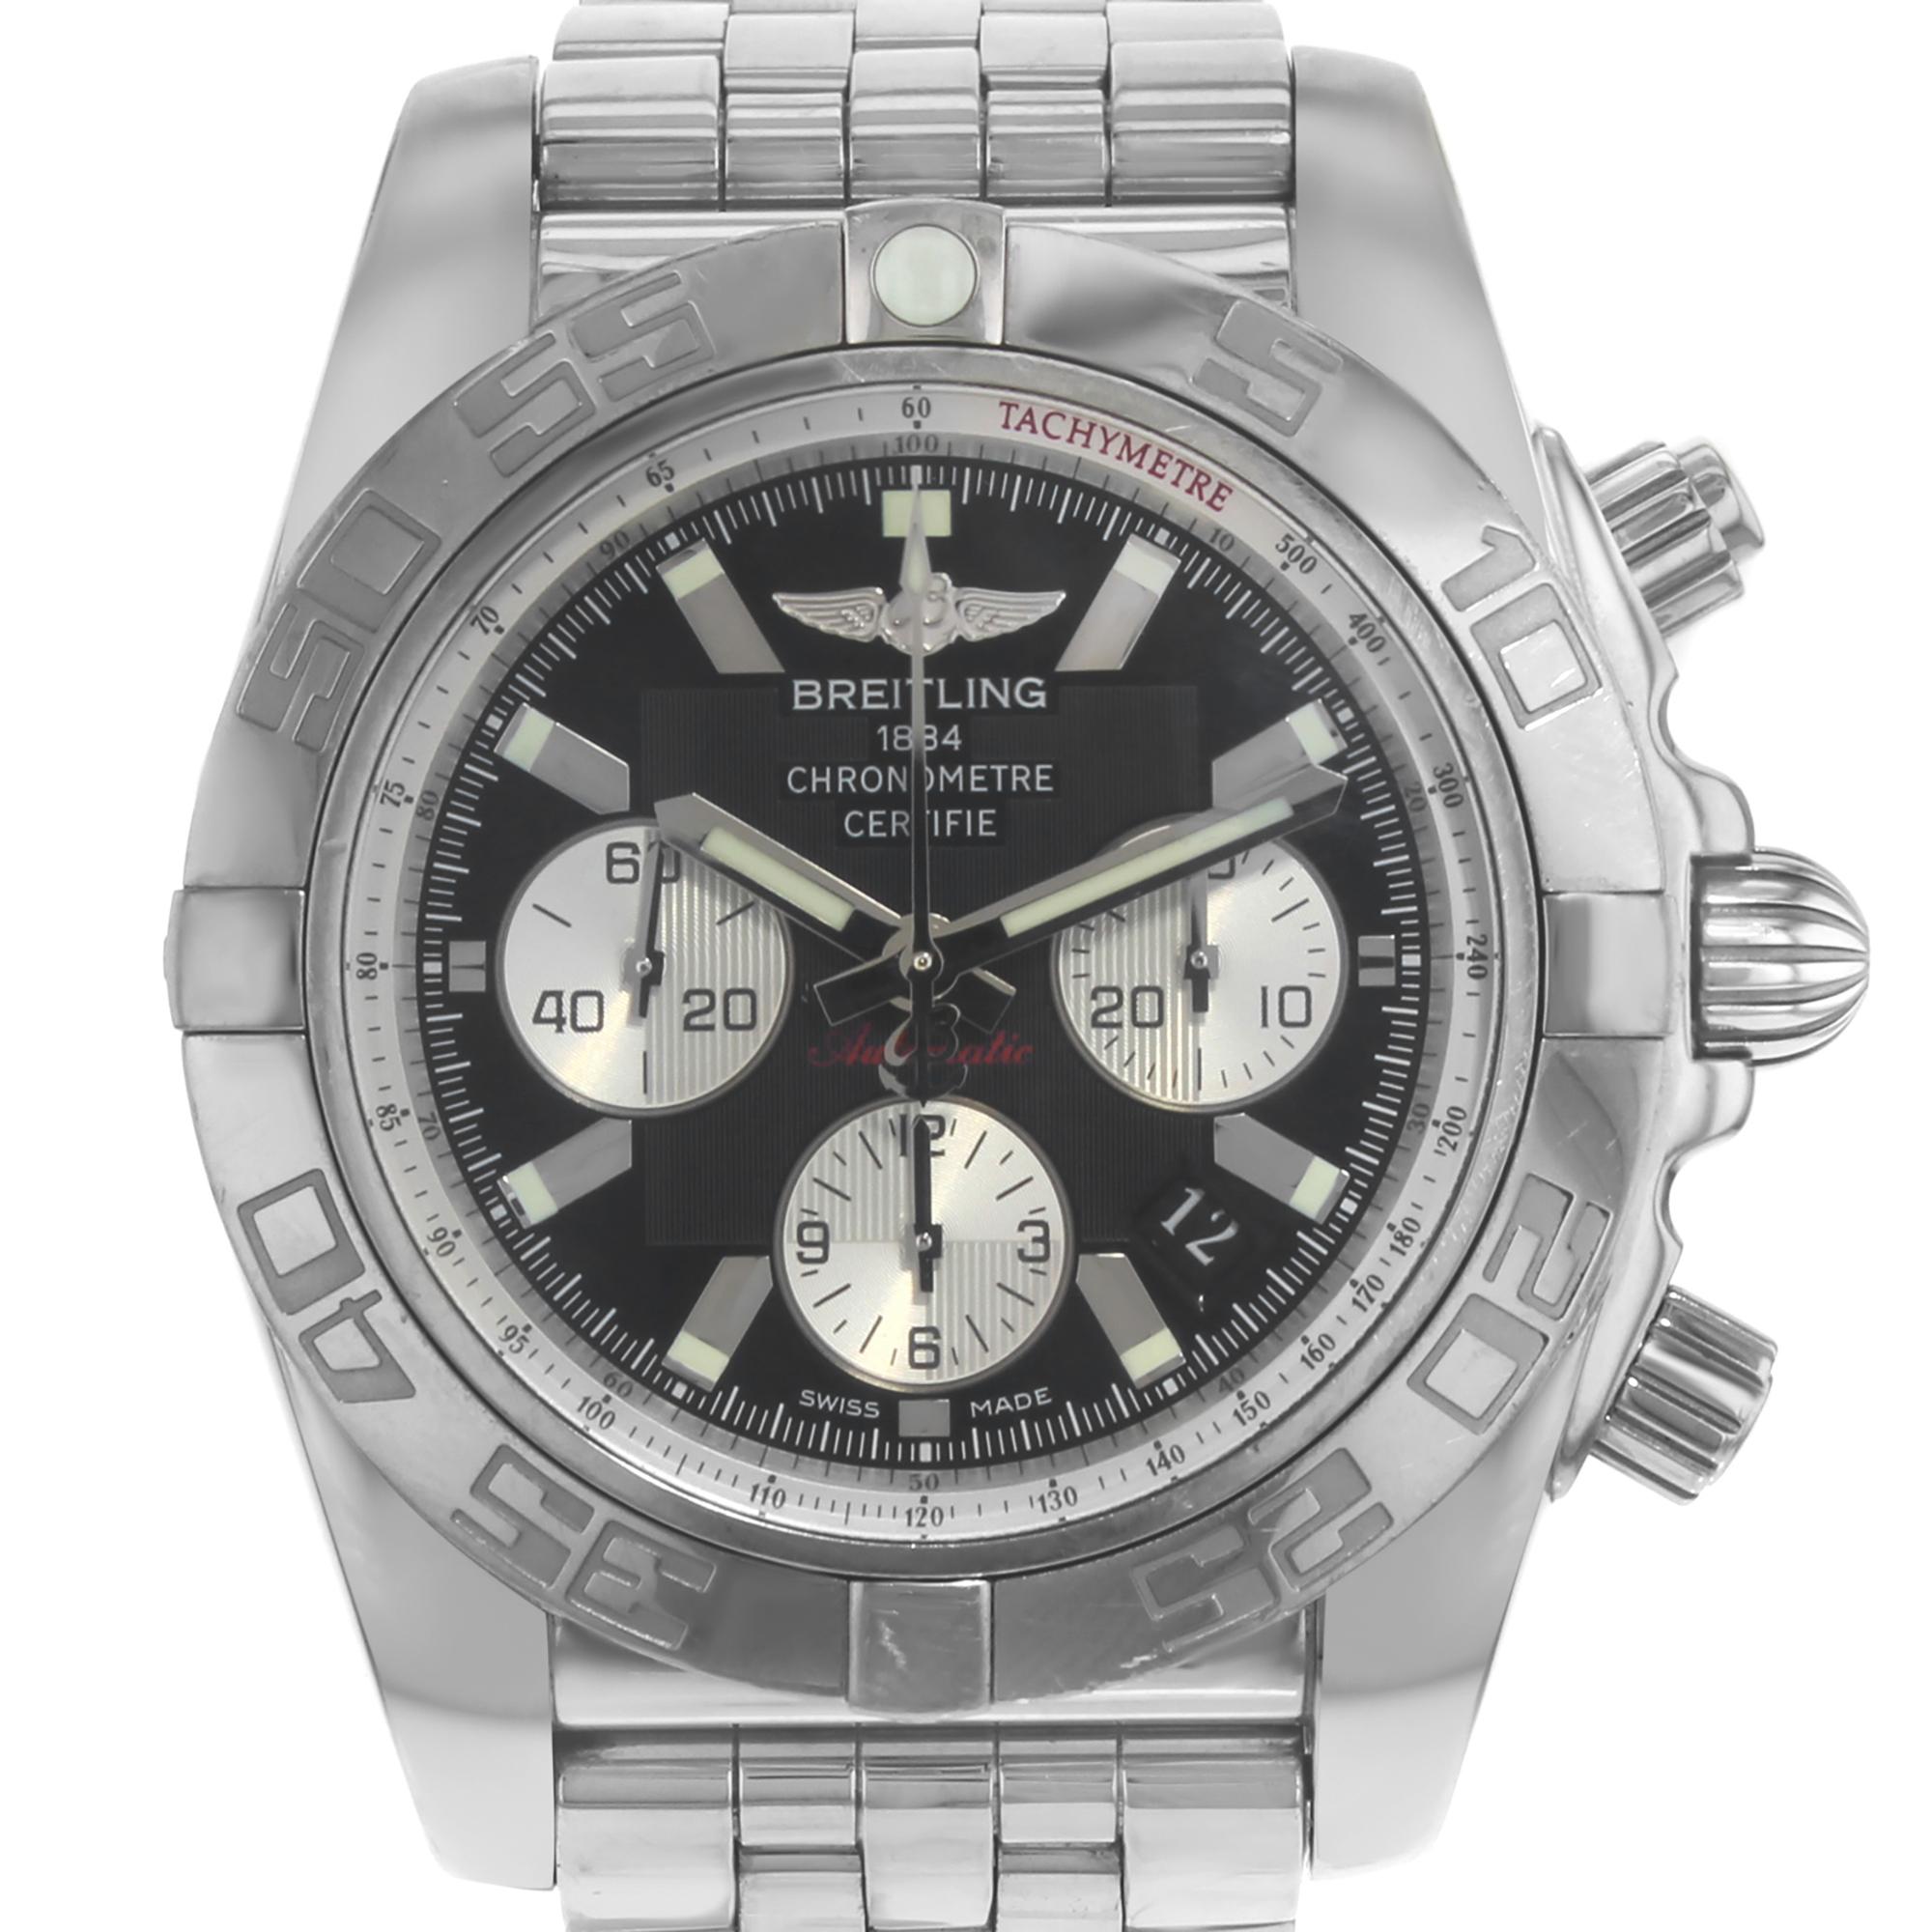 This pre-owned Breitling Chronomat 44 AB011012/B967-375A is a beautiful men's timepiece that is powered by mechanical (automatic) movement which is cased in a stainless steel case. It has a round shape face, chronograph, date indicator, small